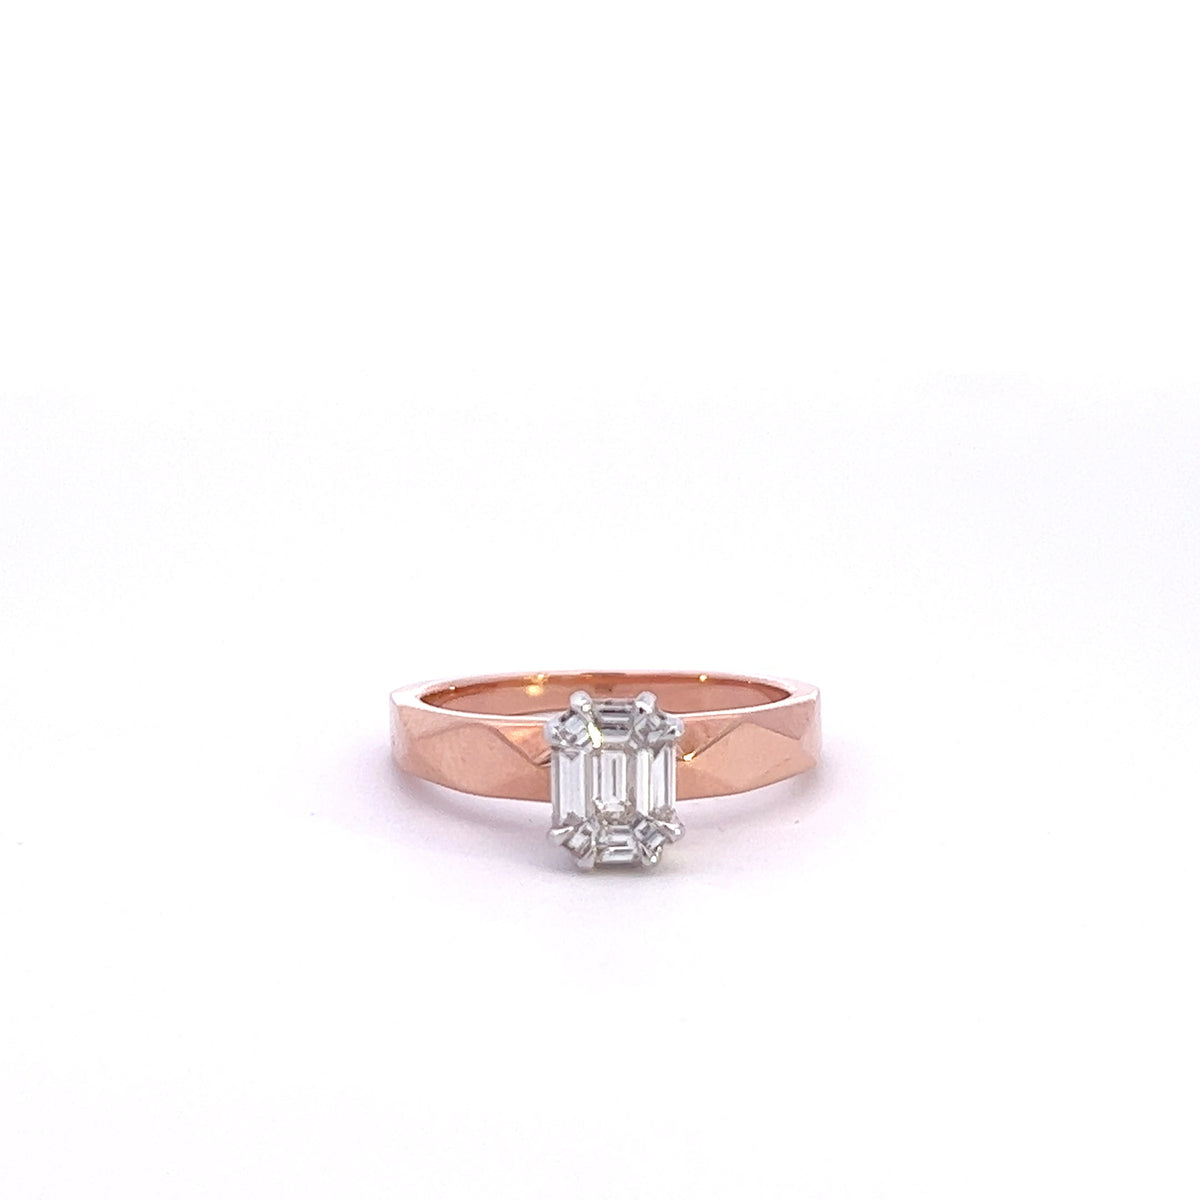 14K Rose Gold Solitaire Ring with Emerald Cut Diamond